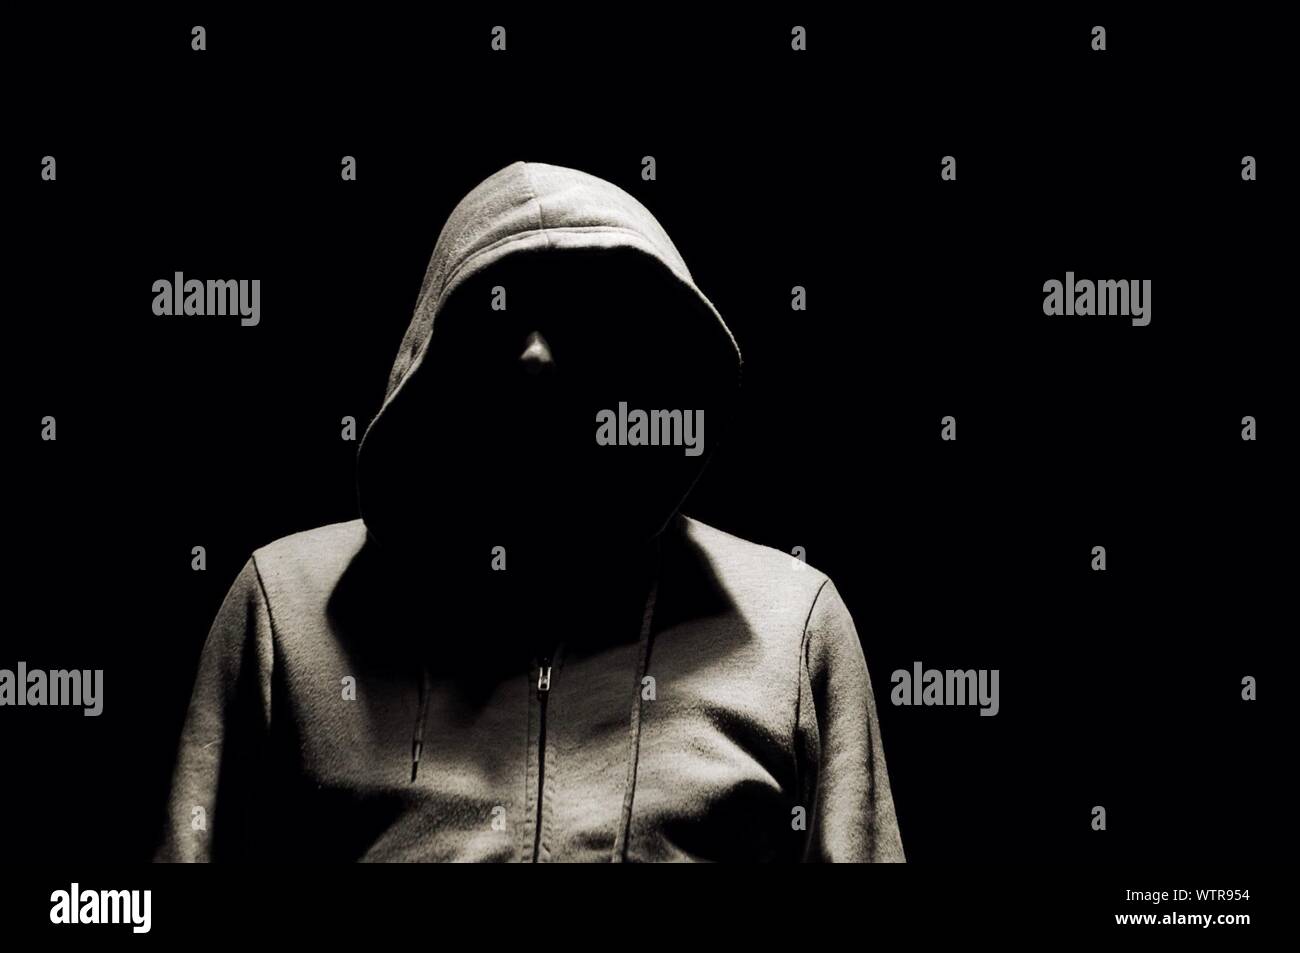 Man In Hooded Jacket Over Black Background Stock Photo